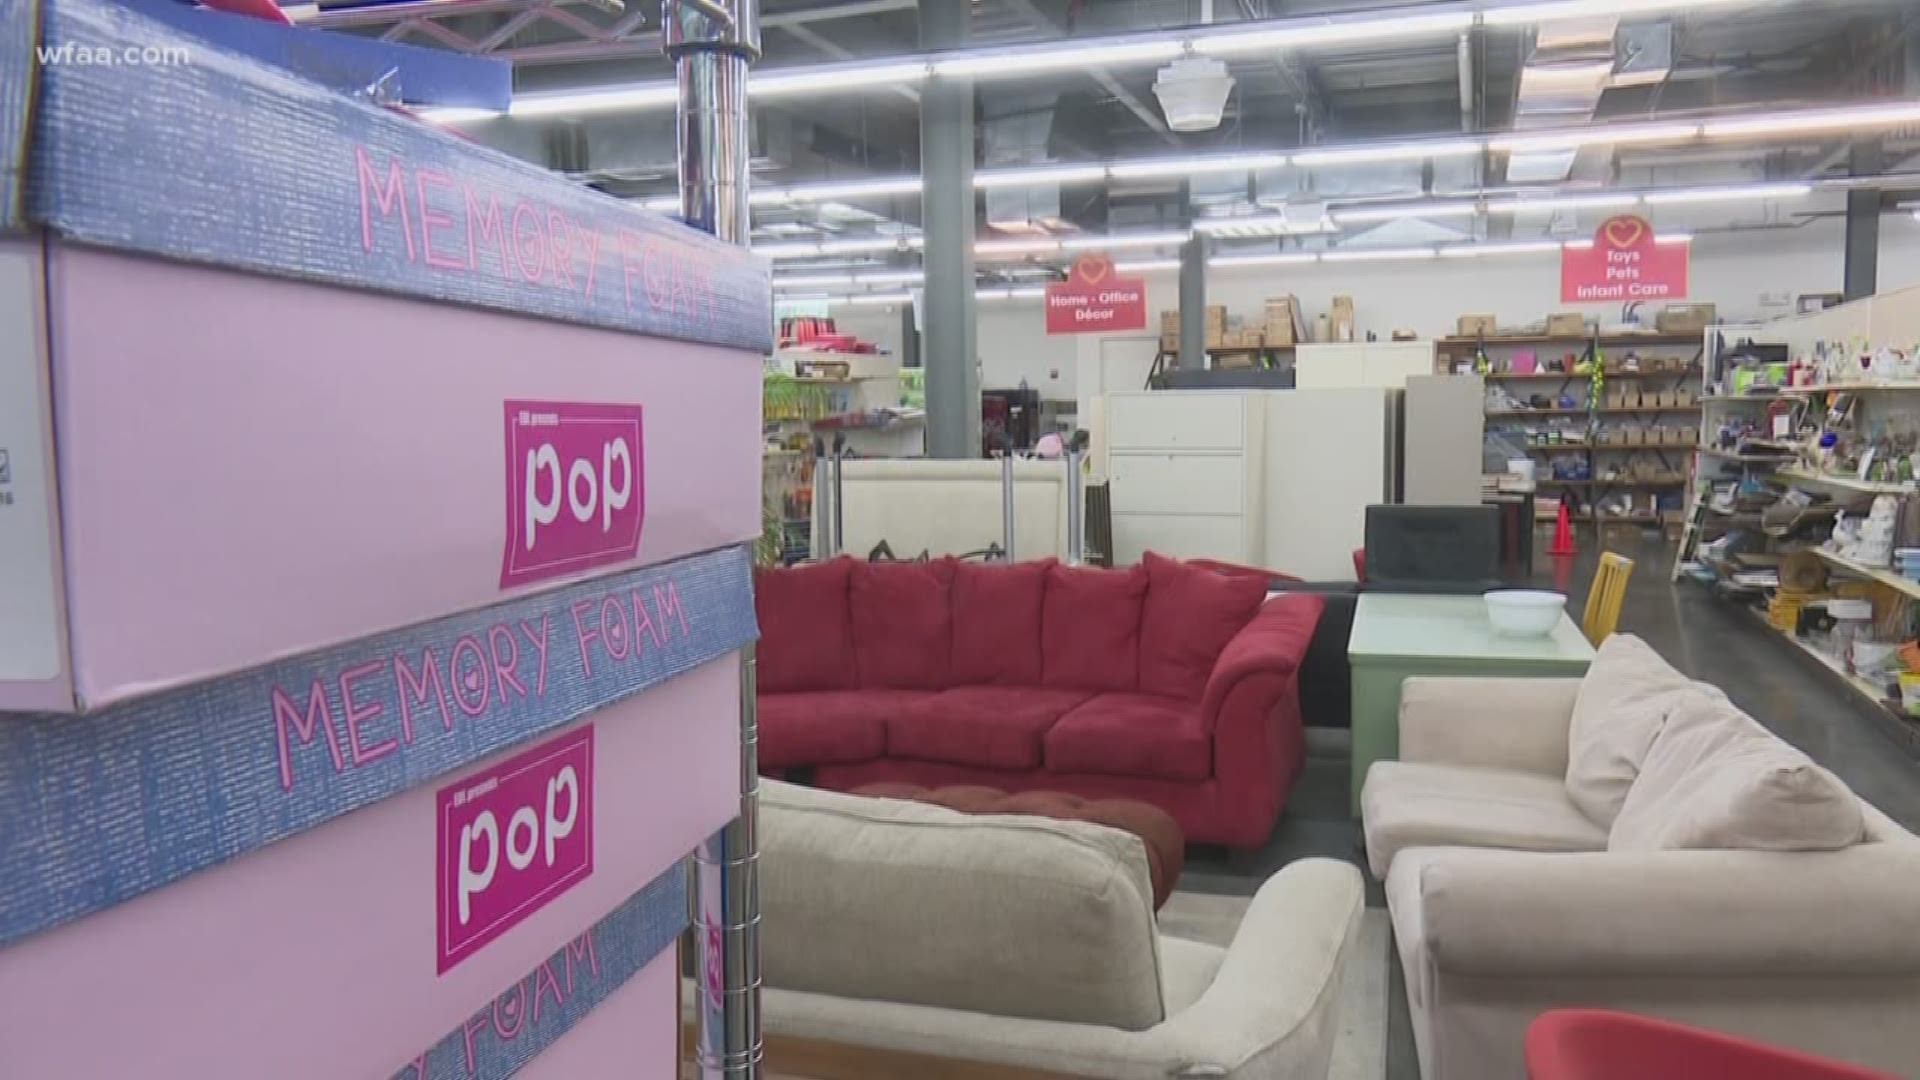 While hundreds of former Elan City Lights residents are still unable to retrieve their belongings, others are looking to a non-profit to help sell furniture. About 50 residents decided to give their furniture to  'Volunteer Now' which is located across the street.